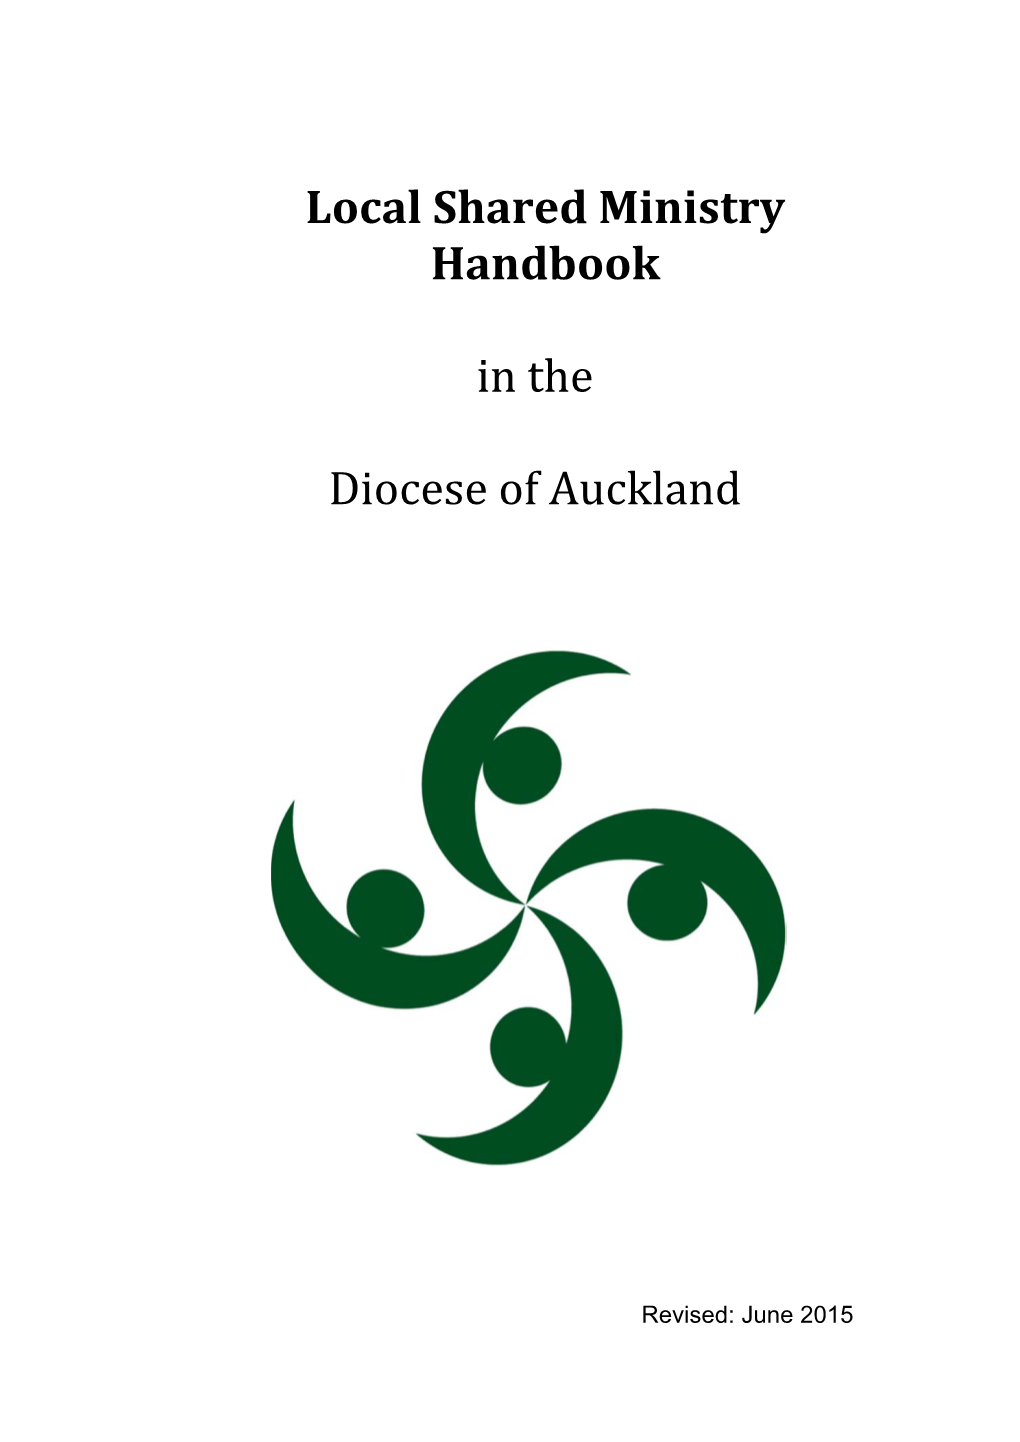 Local Shared Ministry Handbook in the Diocese of Auckland